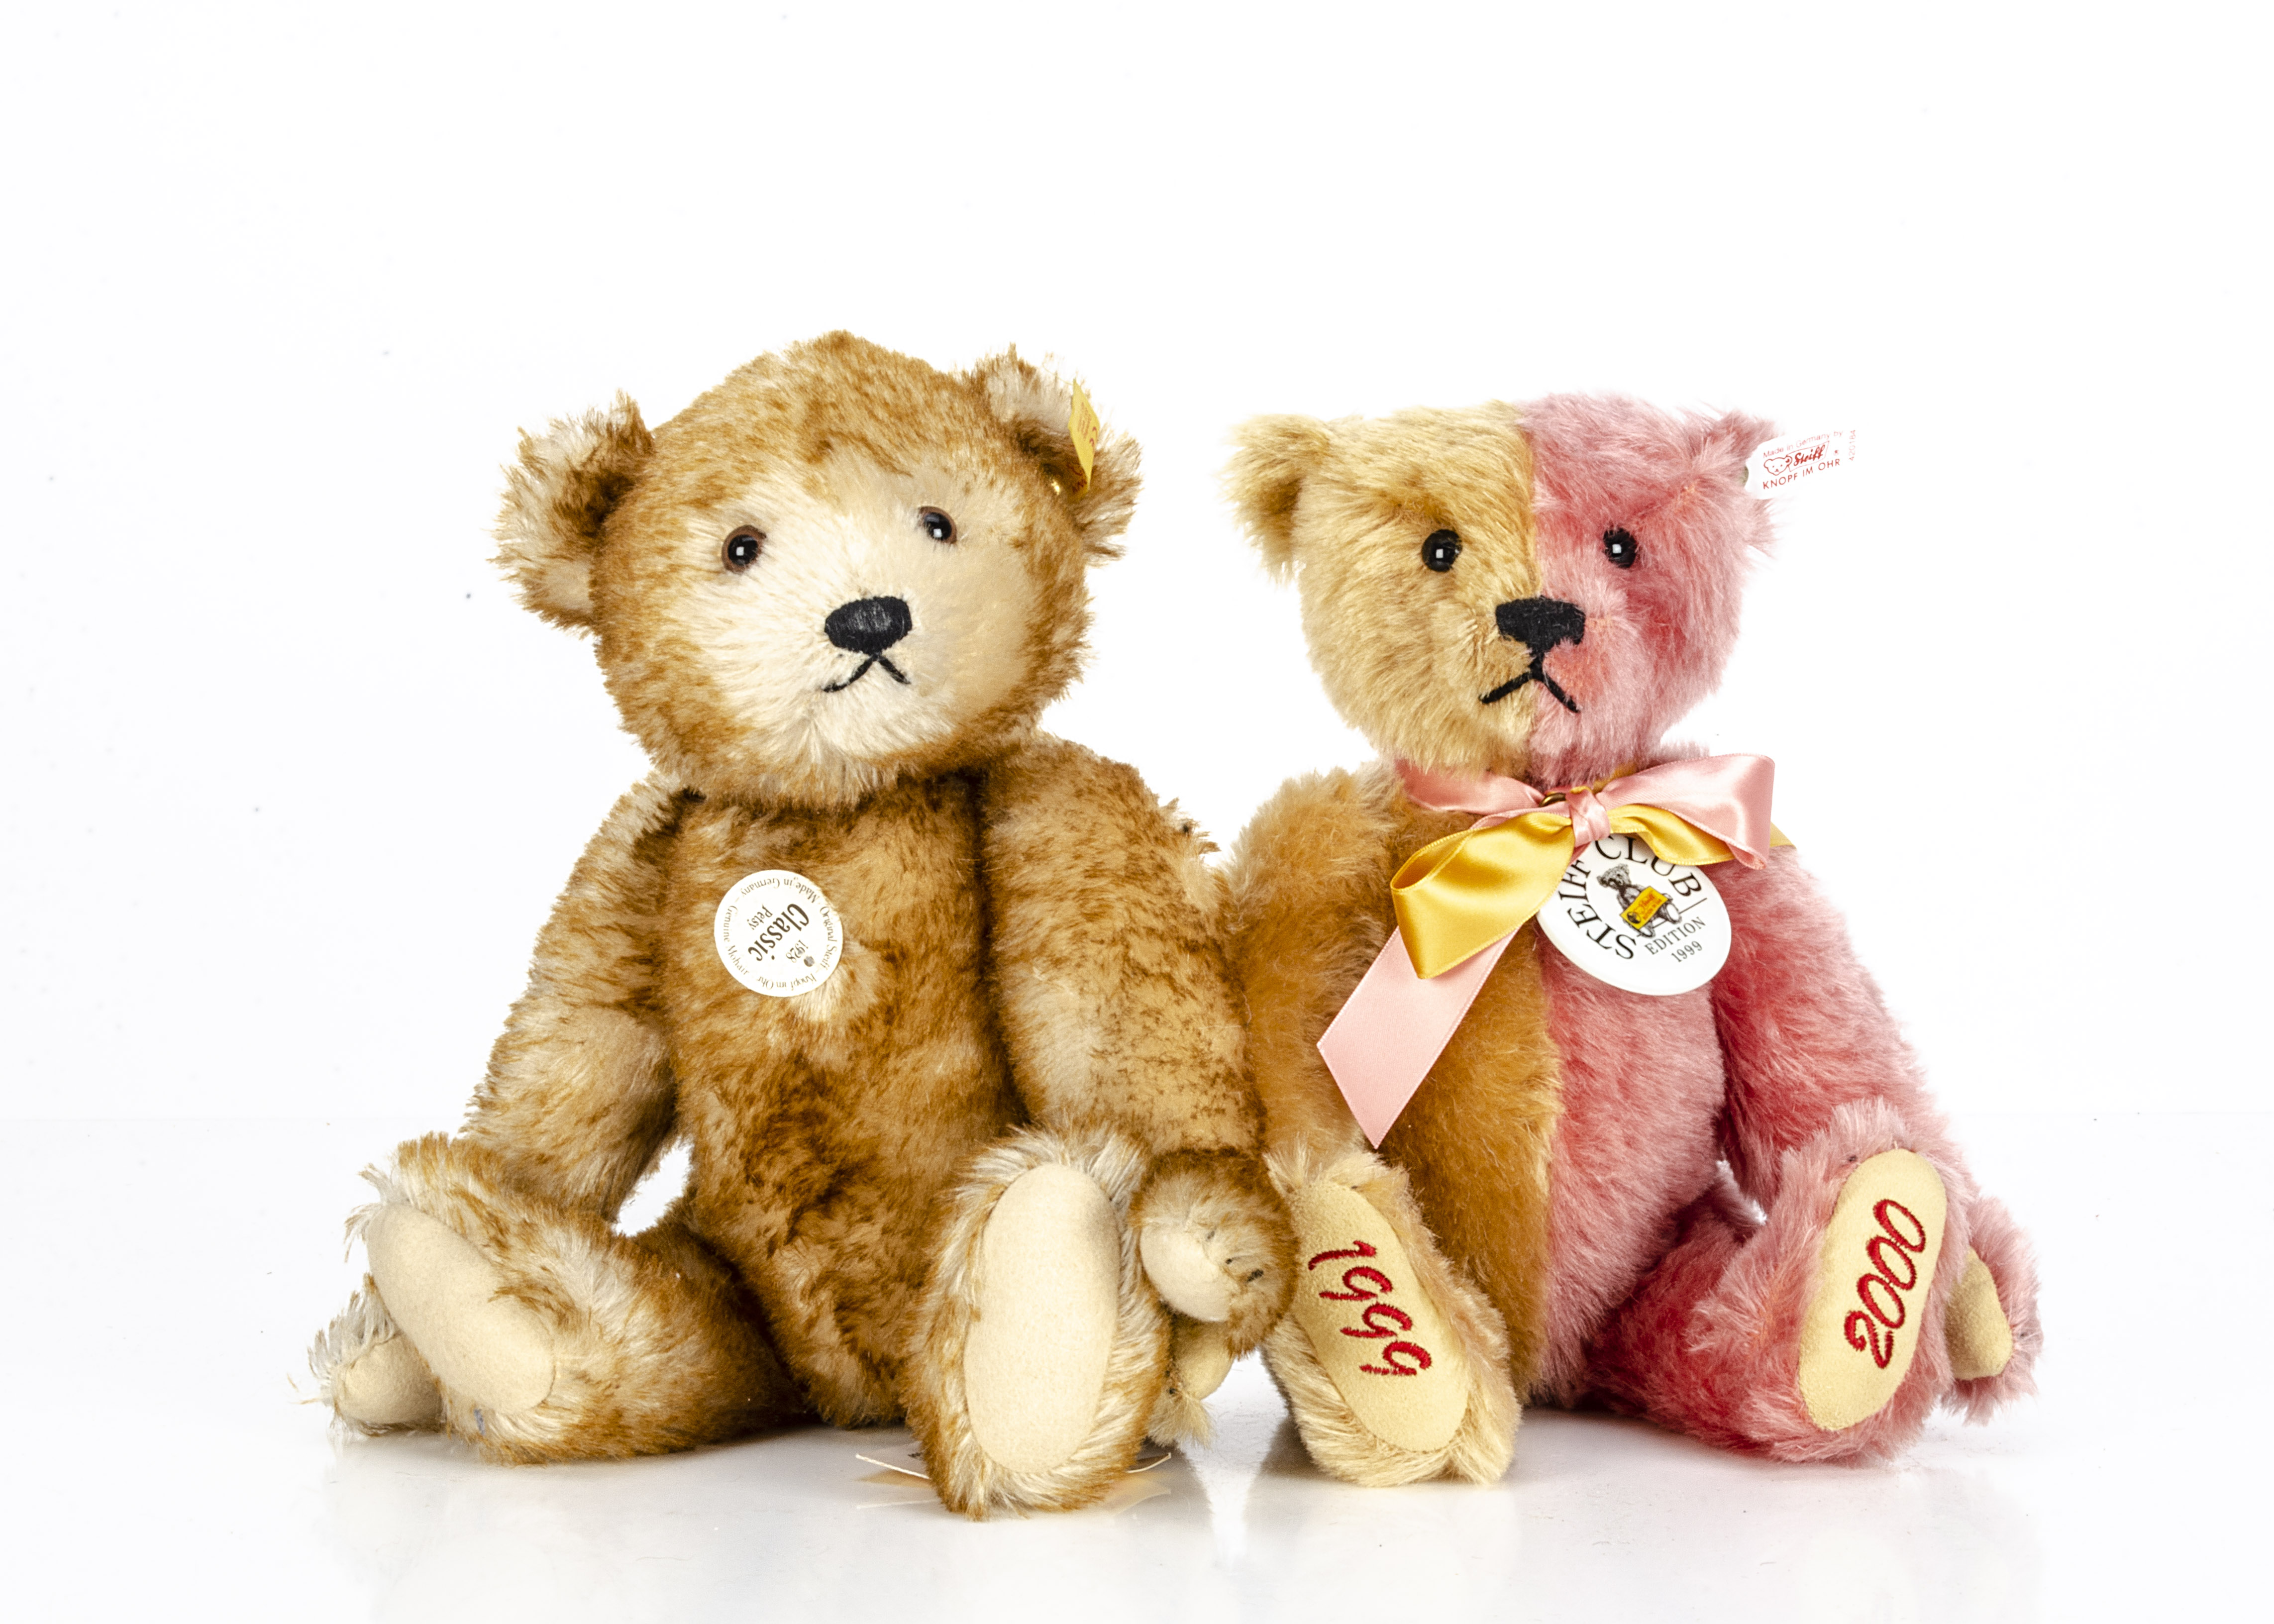 A Steiff limited Club edition gold/rose Teddy Bear, 7088 for 1999, in original box with certificate;